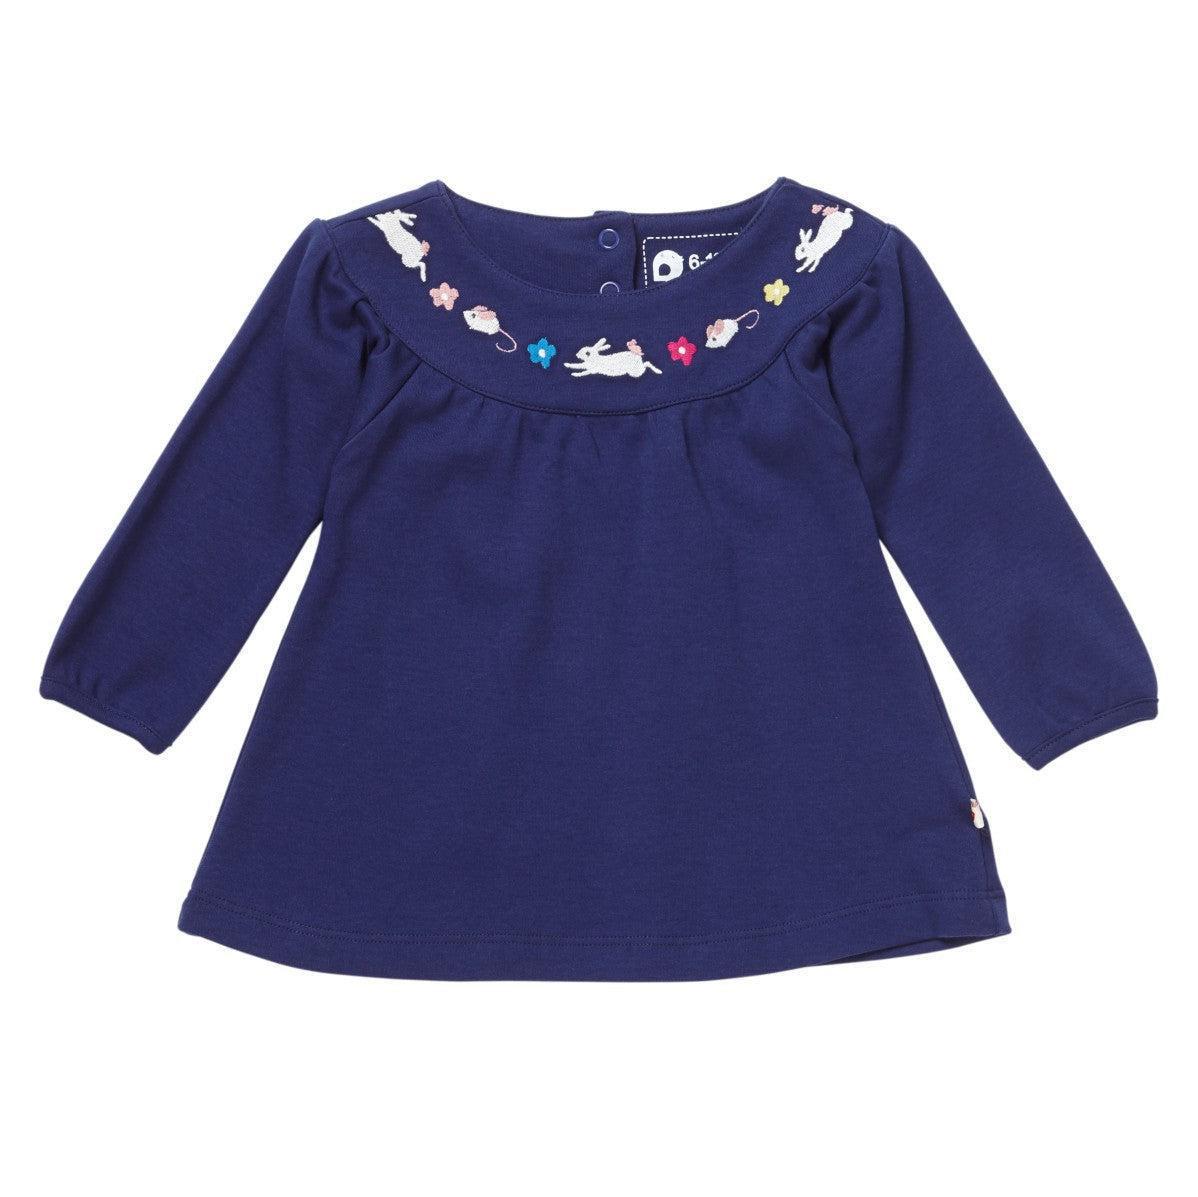 Piccalilly Bunny & Mouse Embroidered Top - 3-4 years